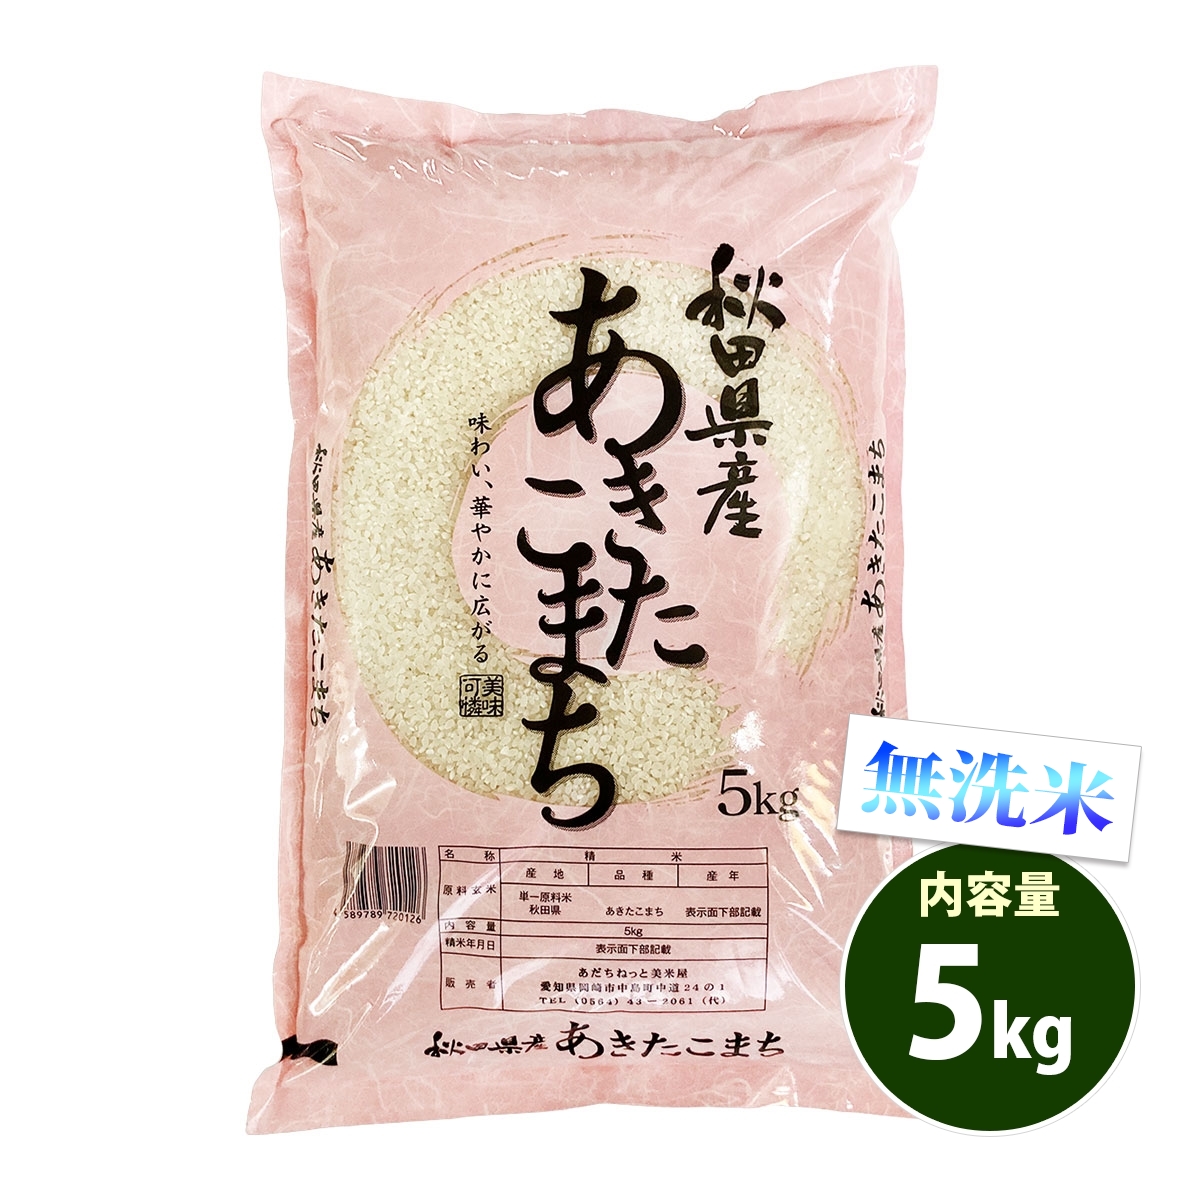 92%OFF!】 令和4年産 無洗米あきたこまちA 国産 5kg 4袋セット 20kg